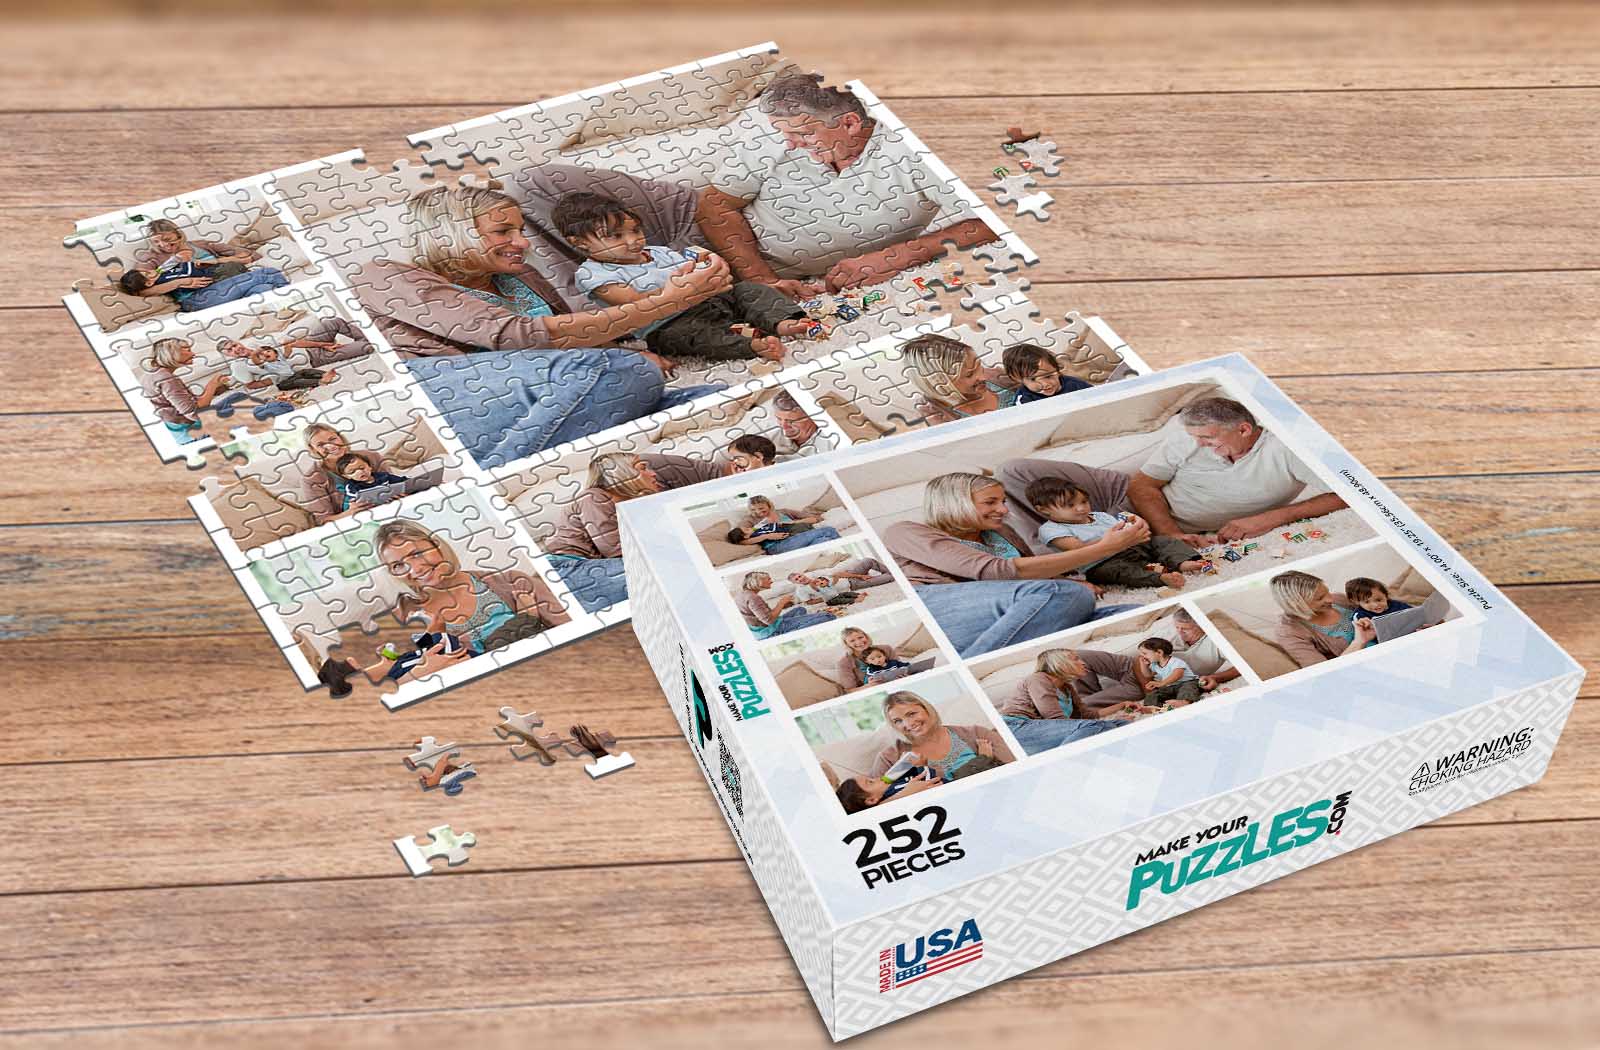 252 Piece Photo Collage Puzzle with parents and young child and custom puzzle box - Premium Collage Photo Puzzles Made in the USA | Make Your Own Puzzle at MakeYourPuzzles